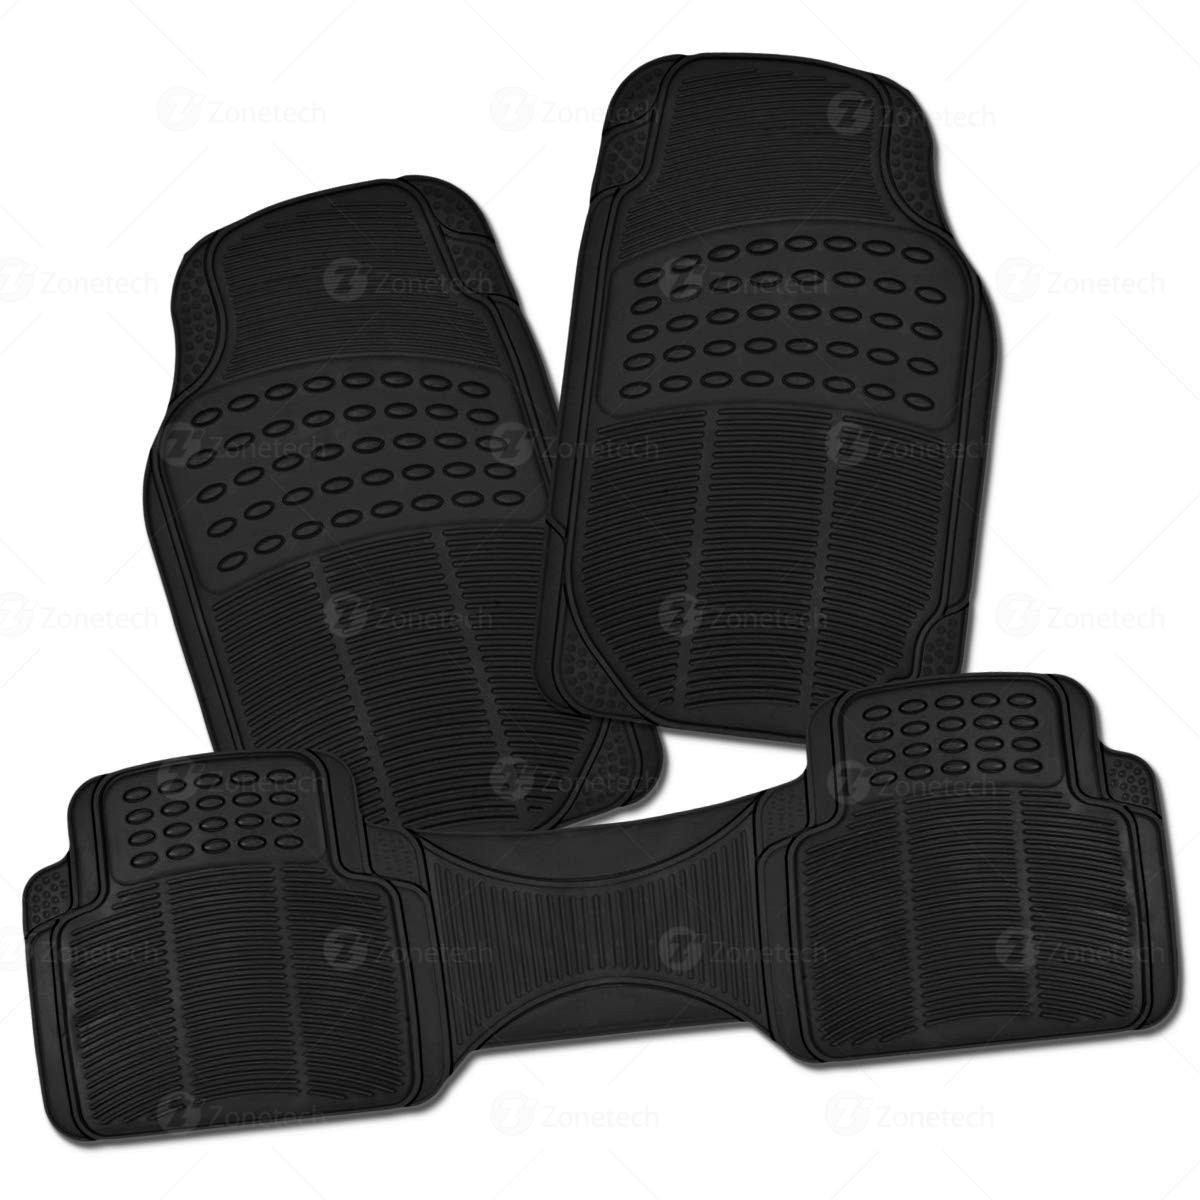  Black All Weather Full Rubber Trimable Floor Mat- 3 Piece